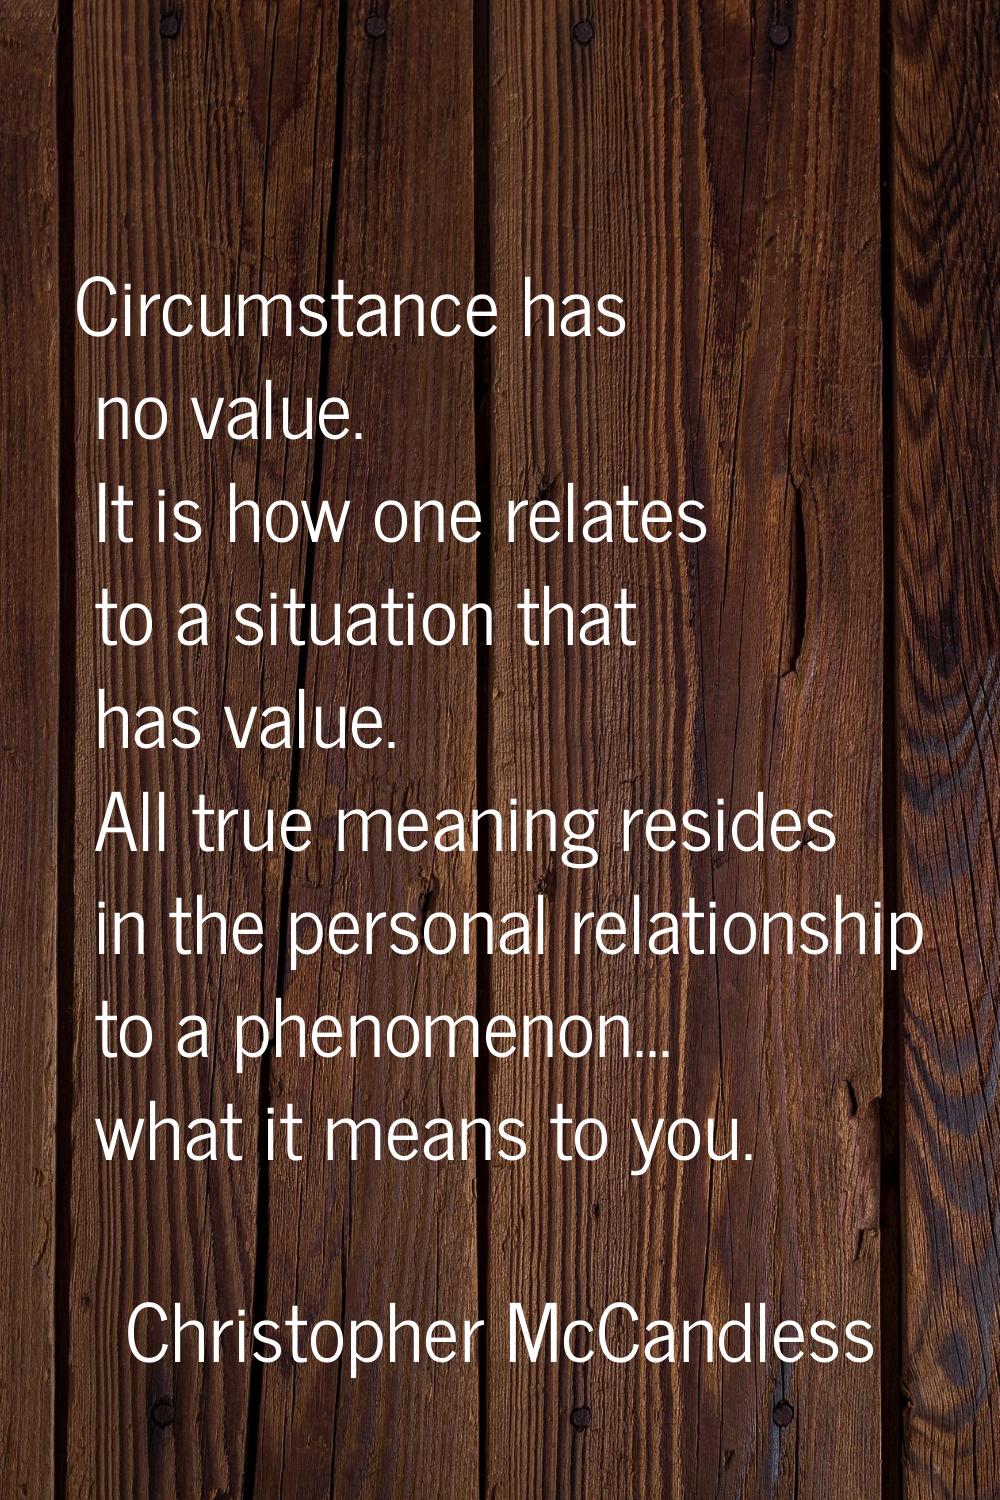 Circumstance has no value. It is how one relates to a situation that has value. All true meaning re